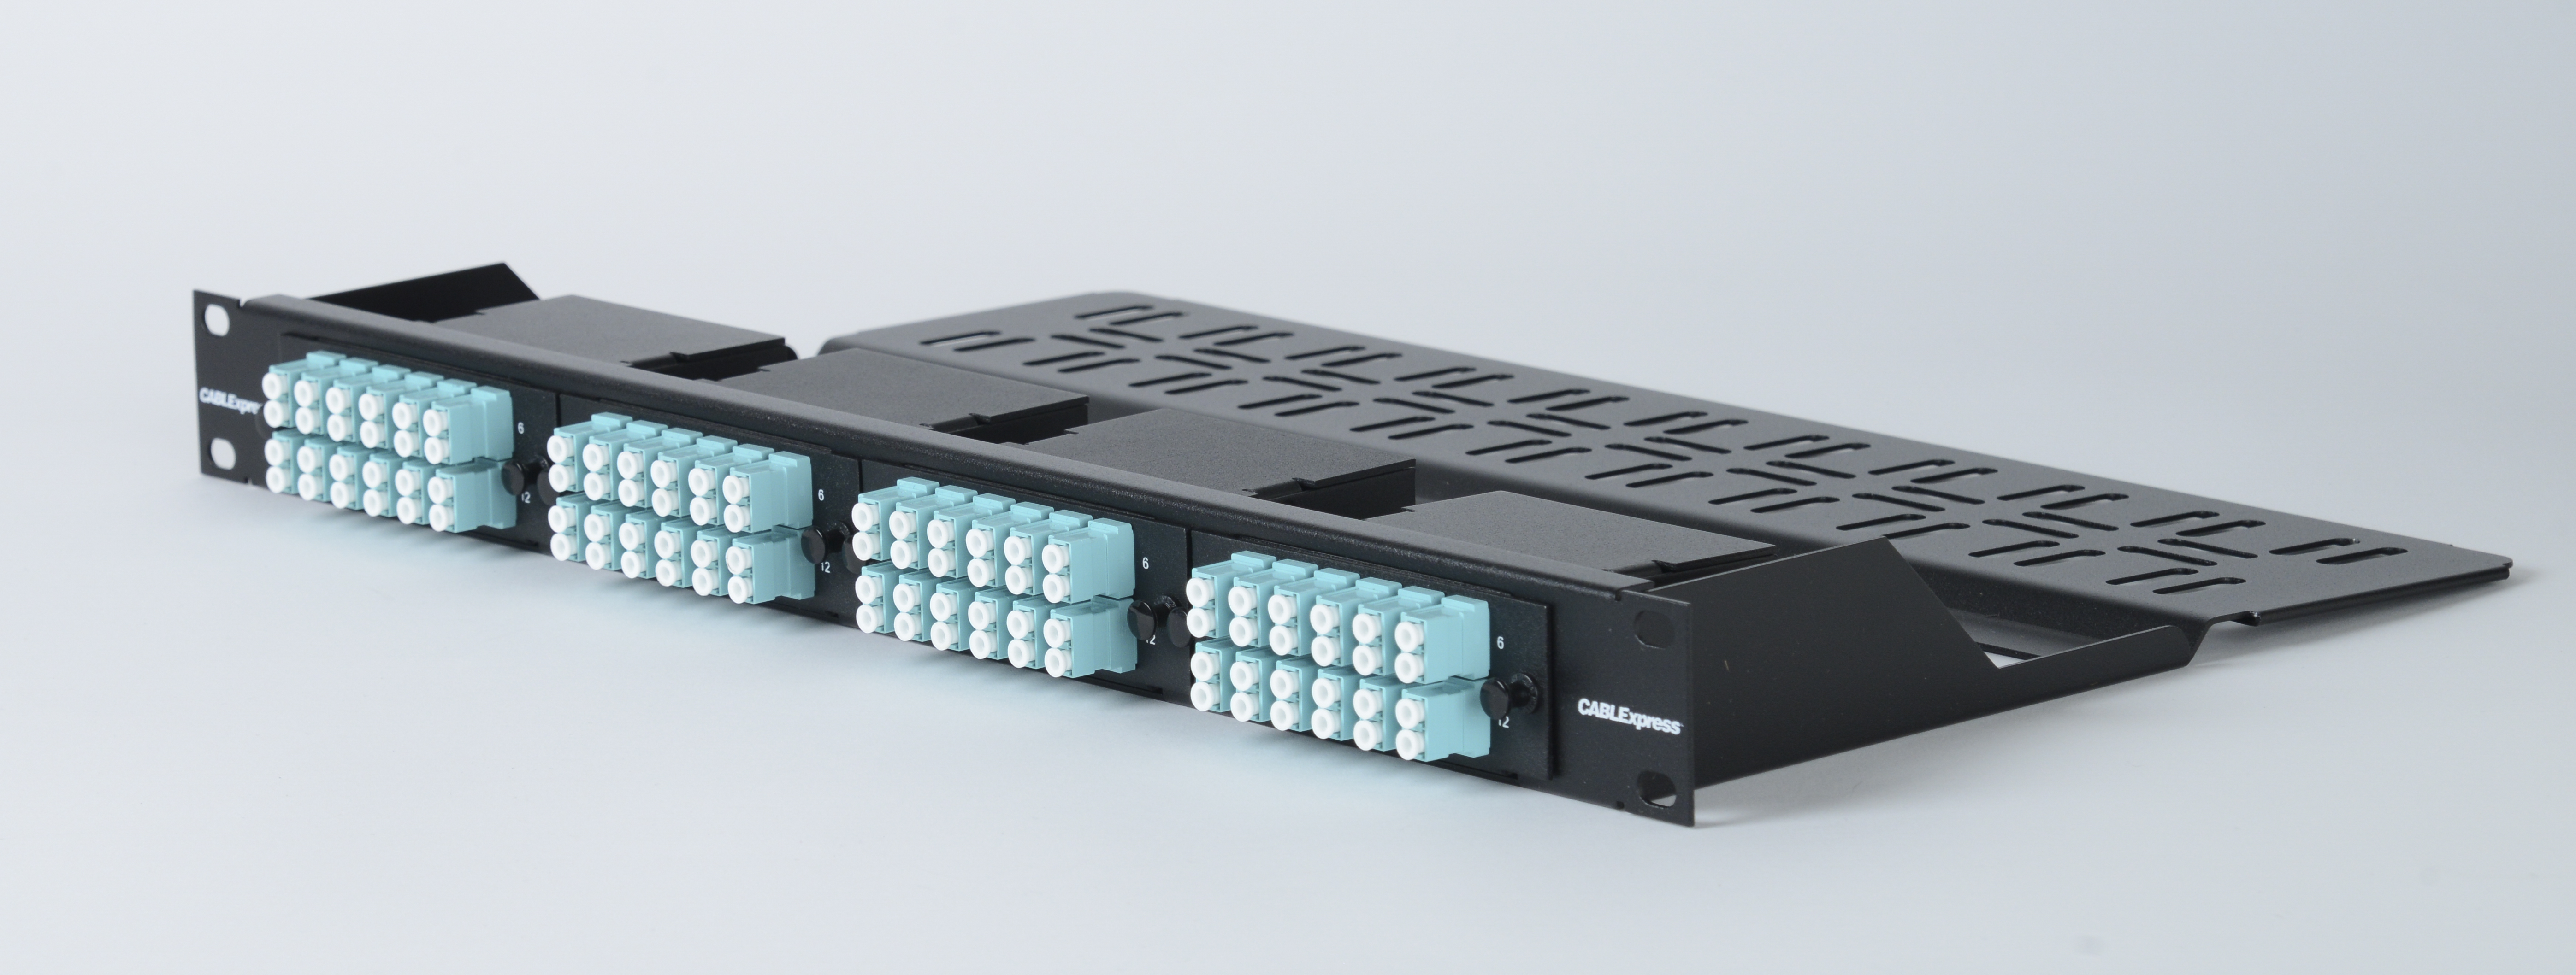 Easy Access Patch Panels